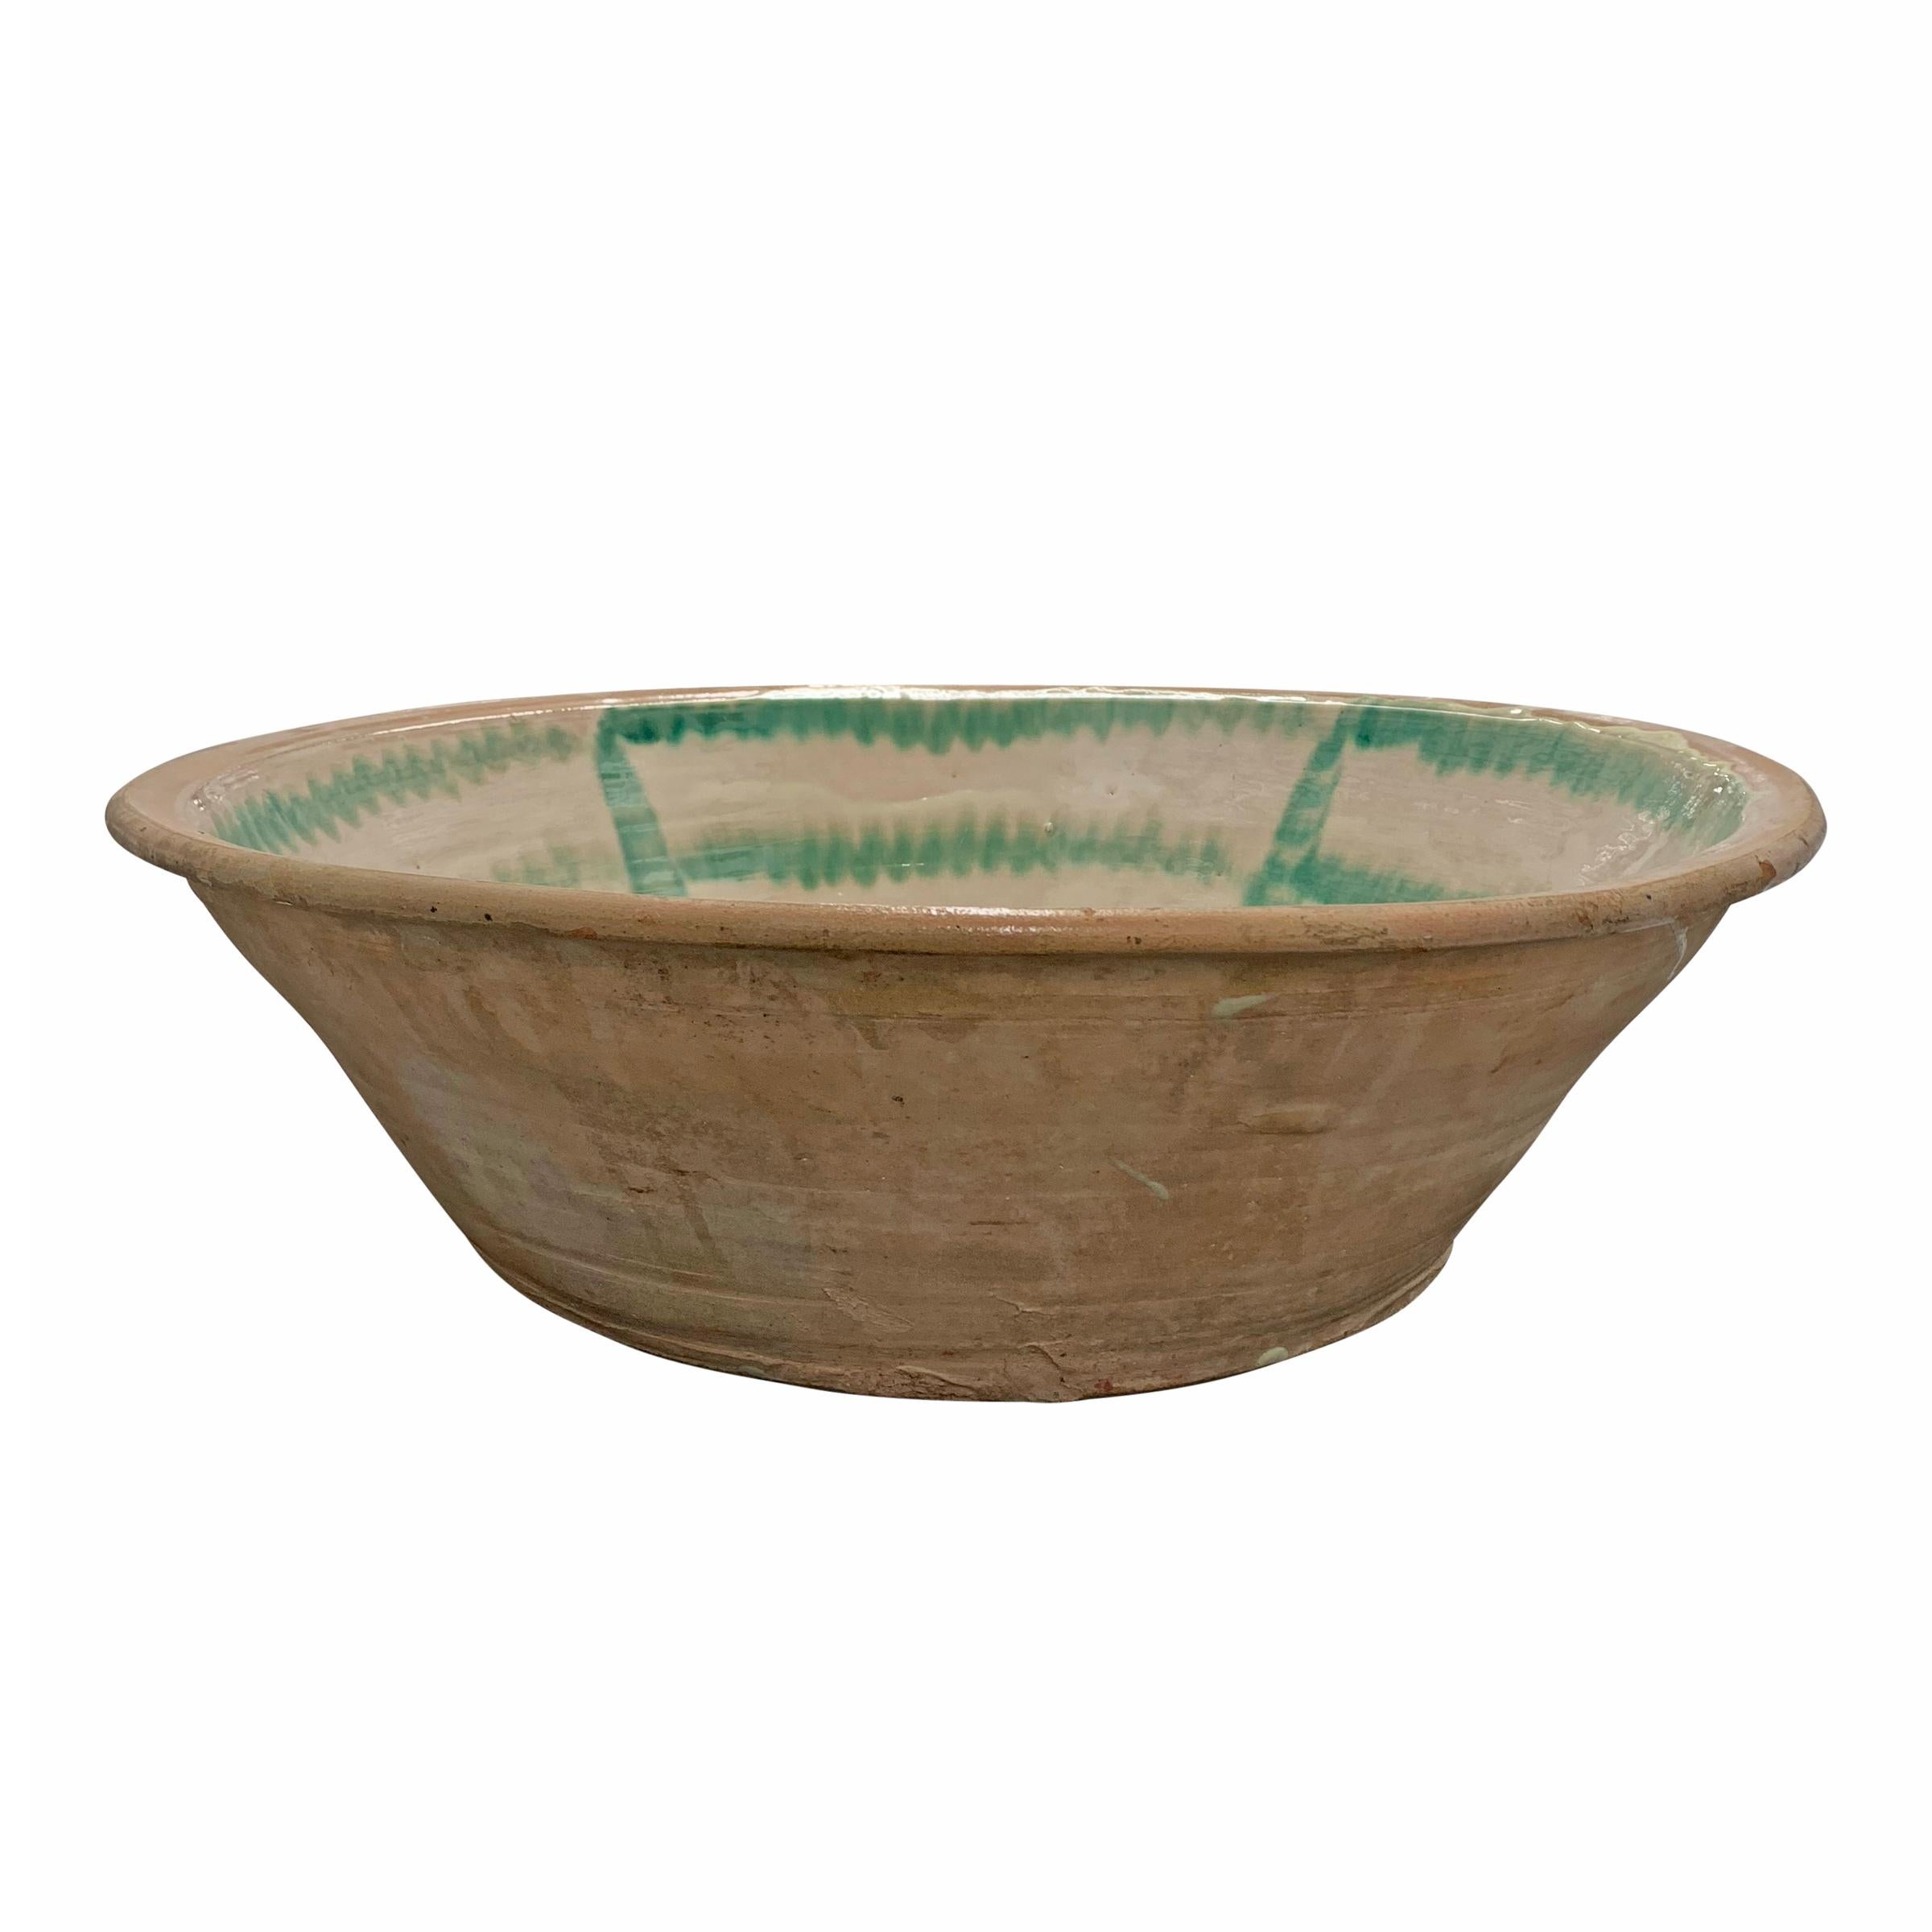 Spanish Colonial Monumental Andalusian Pottery Bowl